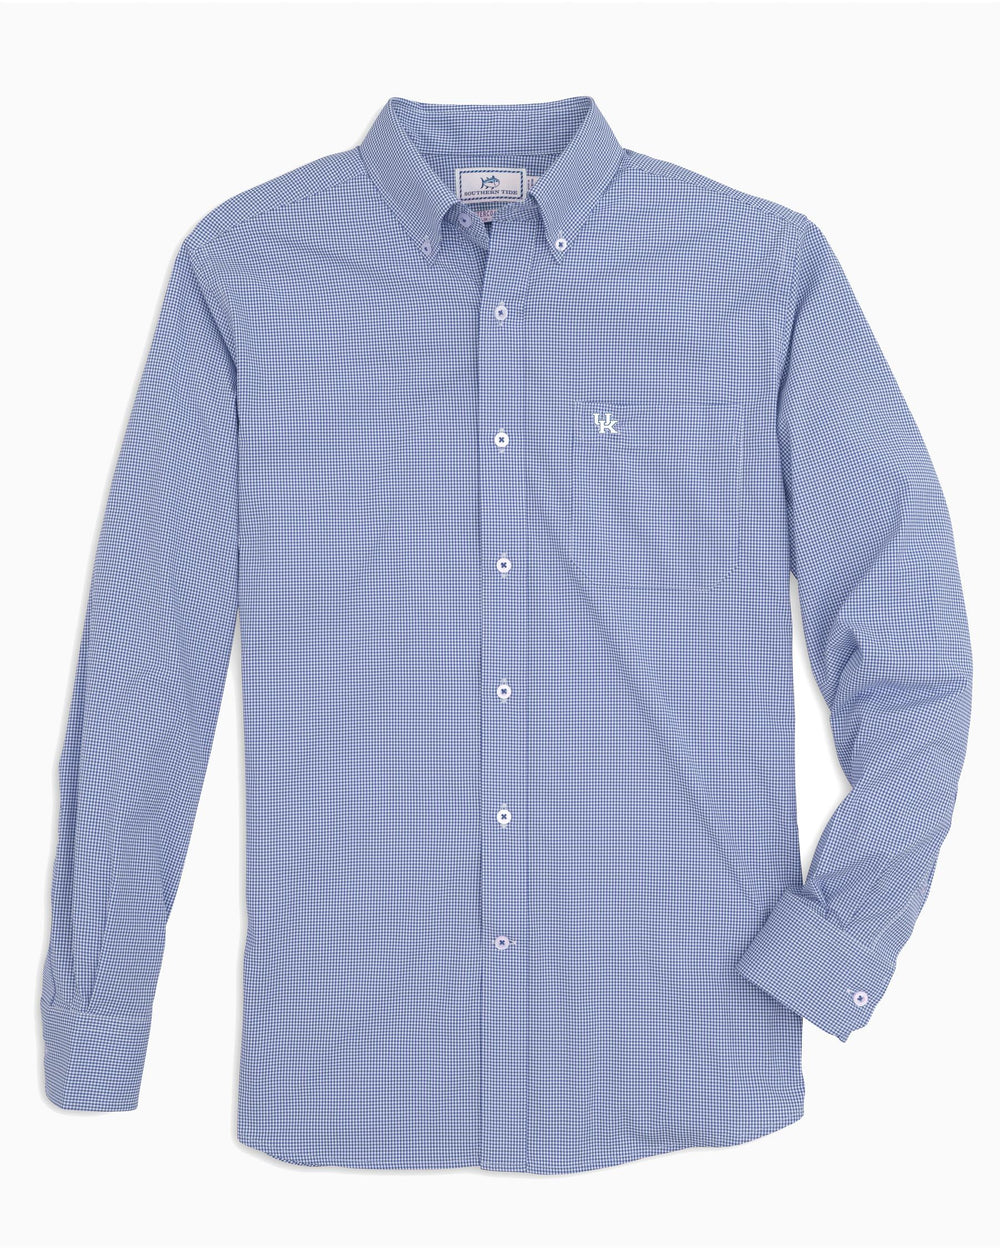 The front view of the Men's Light Blue Kentucky Wildcats Gingham Button Down Shirt by Southern Tide - University Blue